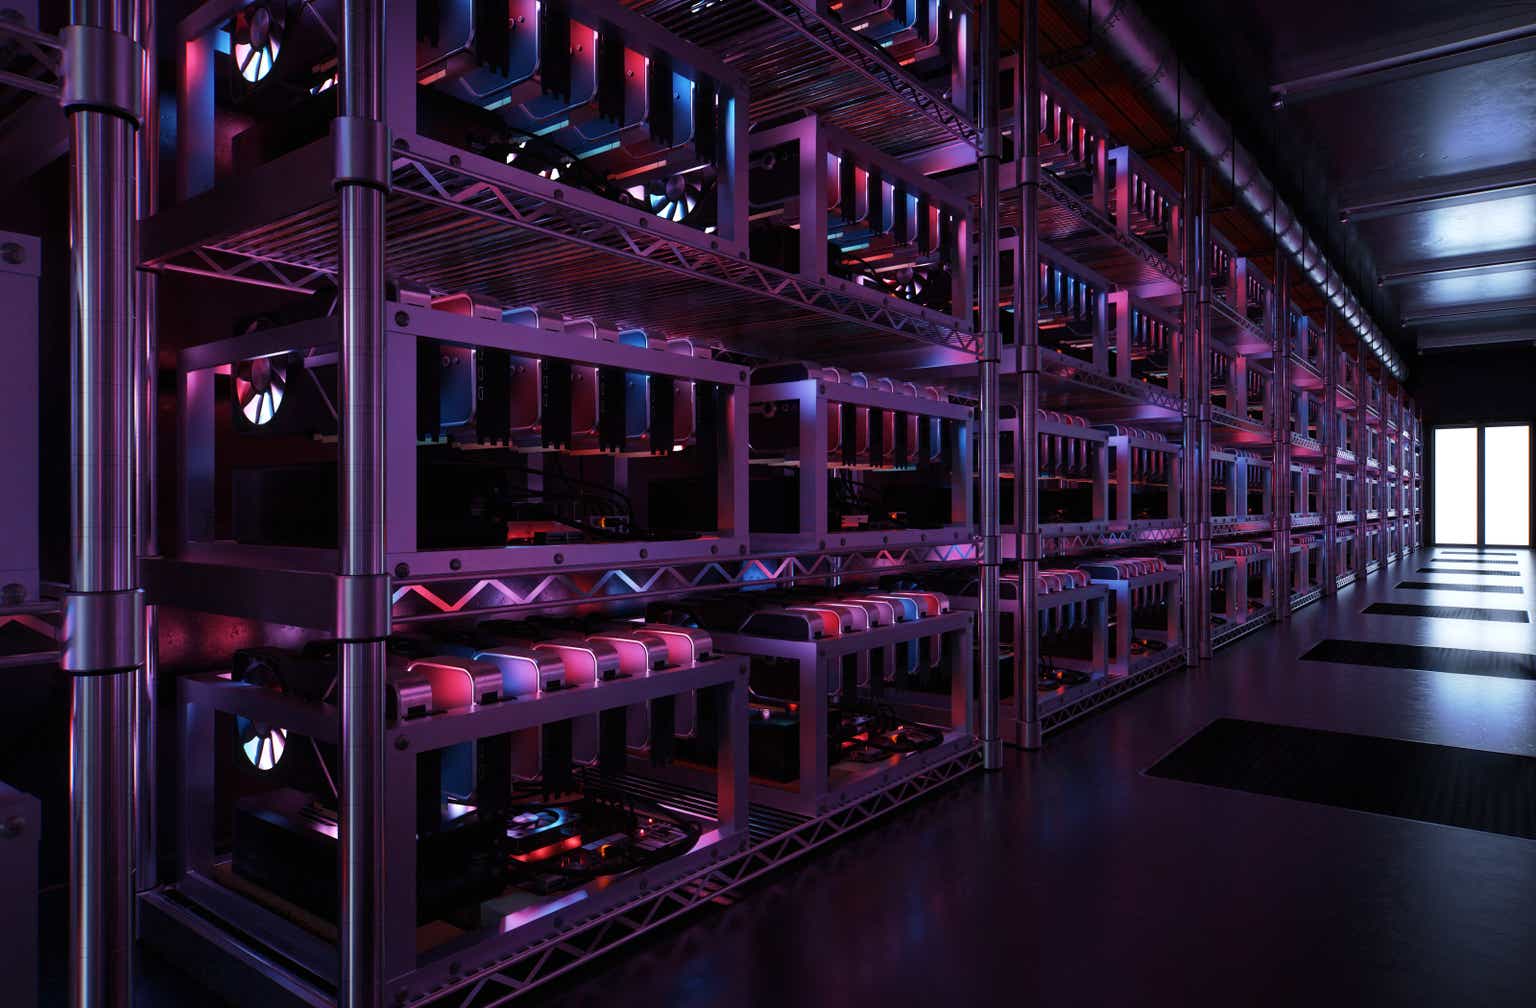 Bitcoin miner Cipher buys 37K Bitmain Antminers for $99.5M